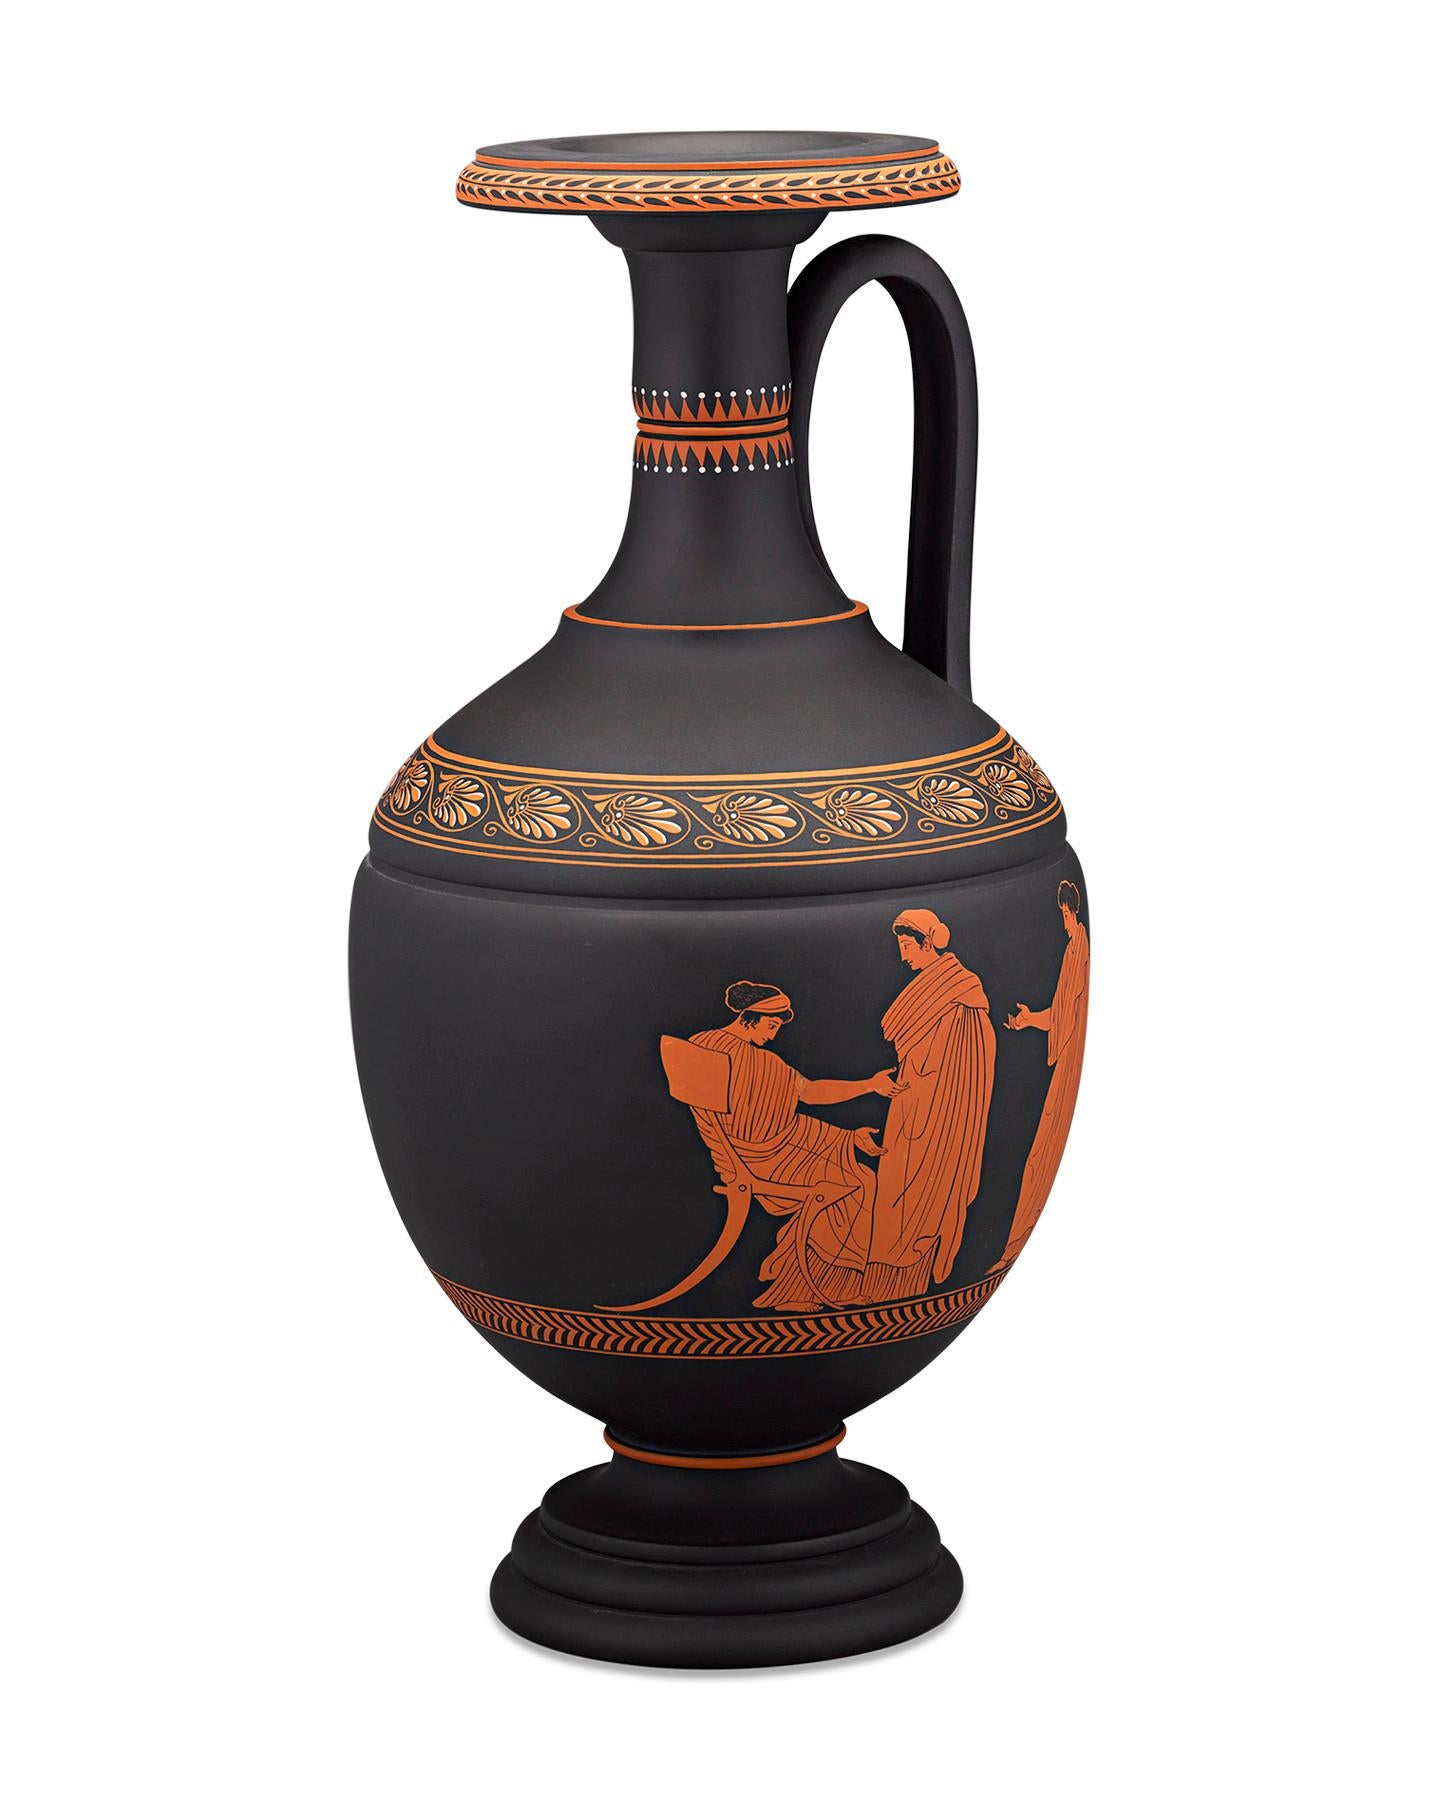 Crafted by Wedgwood, this stately Neoclassical amphora vase is comprised of black basalt — largely considered the pottery firm’s greatest innovation. Terra-cotta red and white encaustic enamel bands of anthemion, or palms, decorate the entire piece,